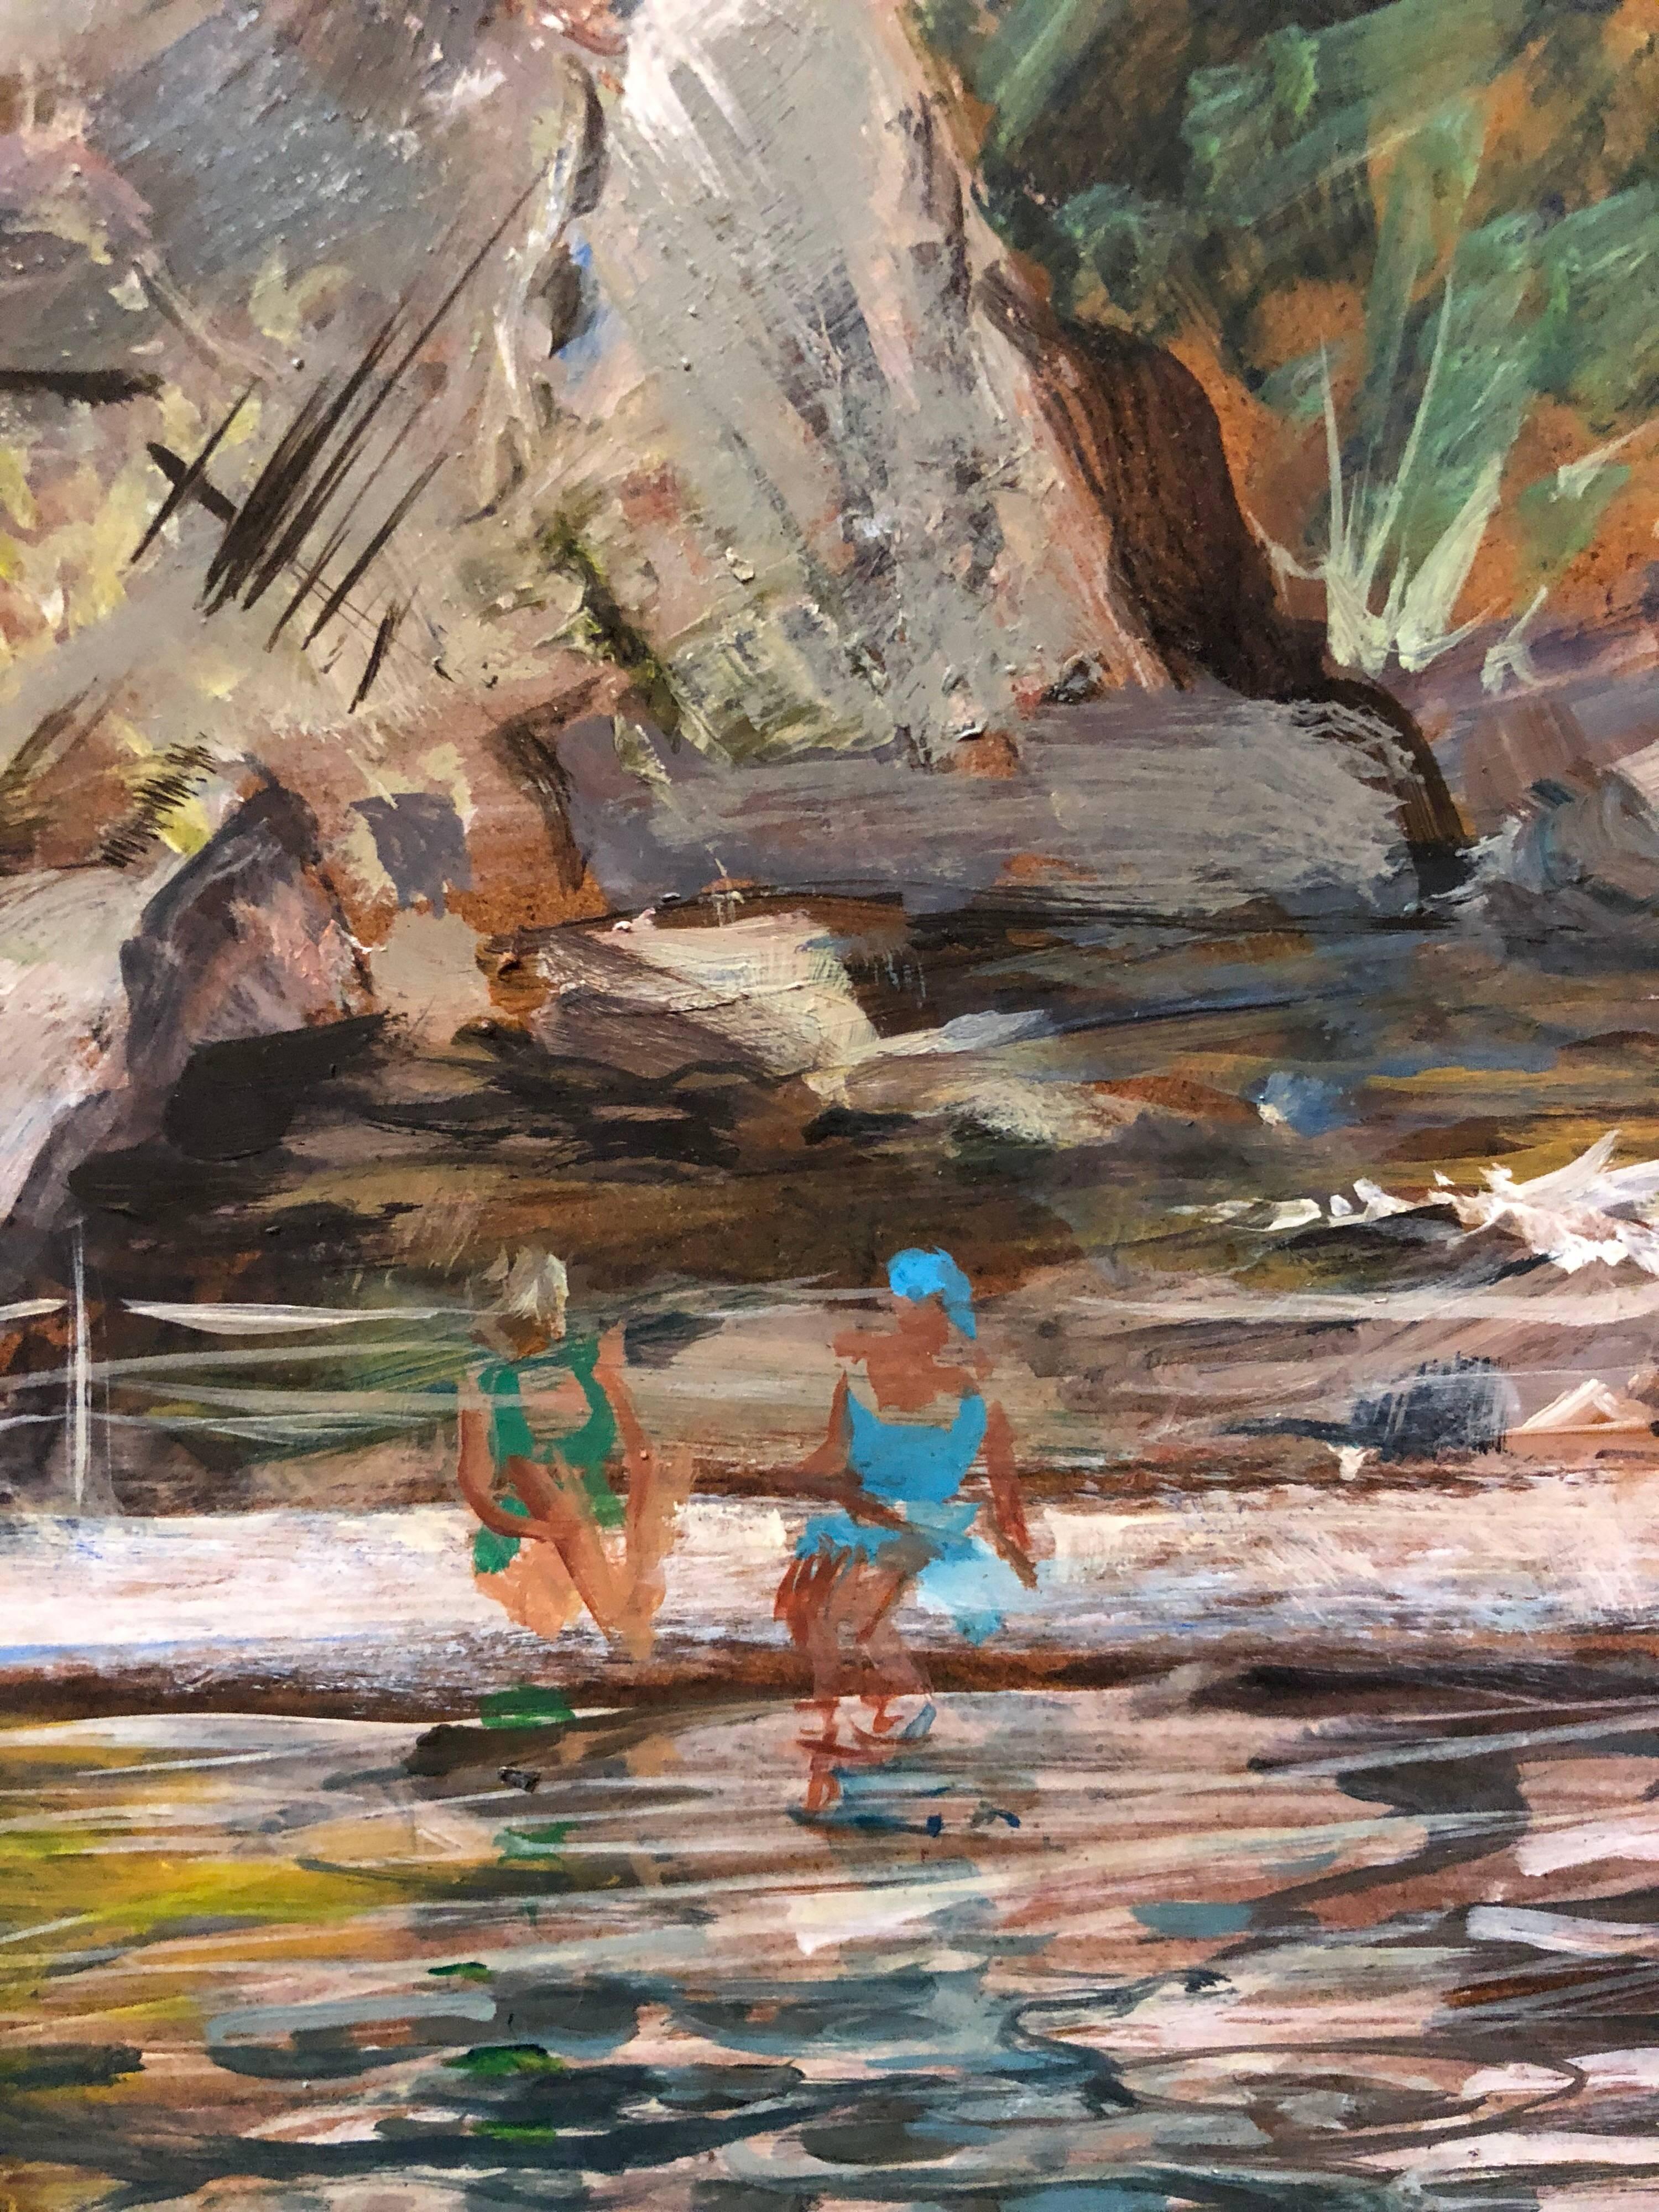 Bathers at the Quarry 1940s American Modernist Oil Painting WPA era For Sale 1